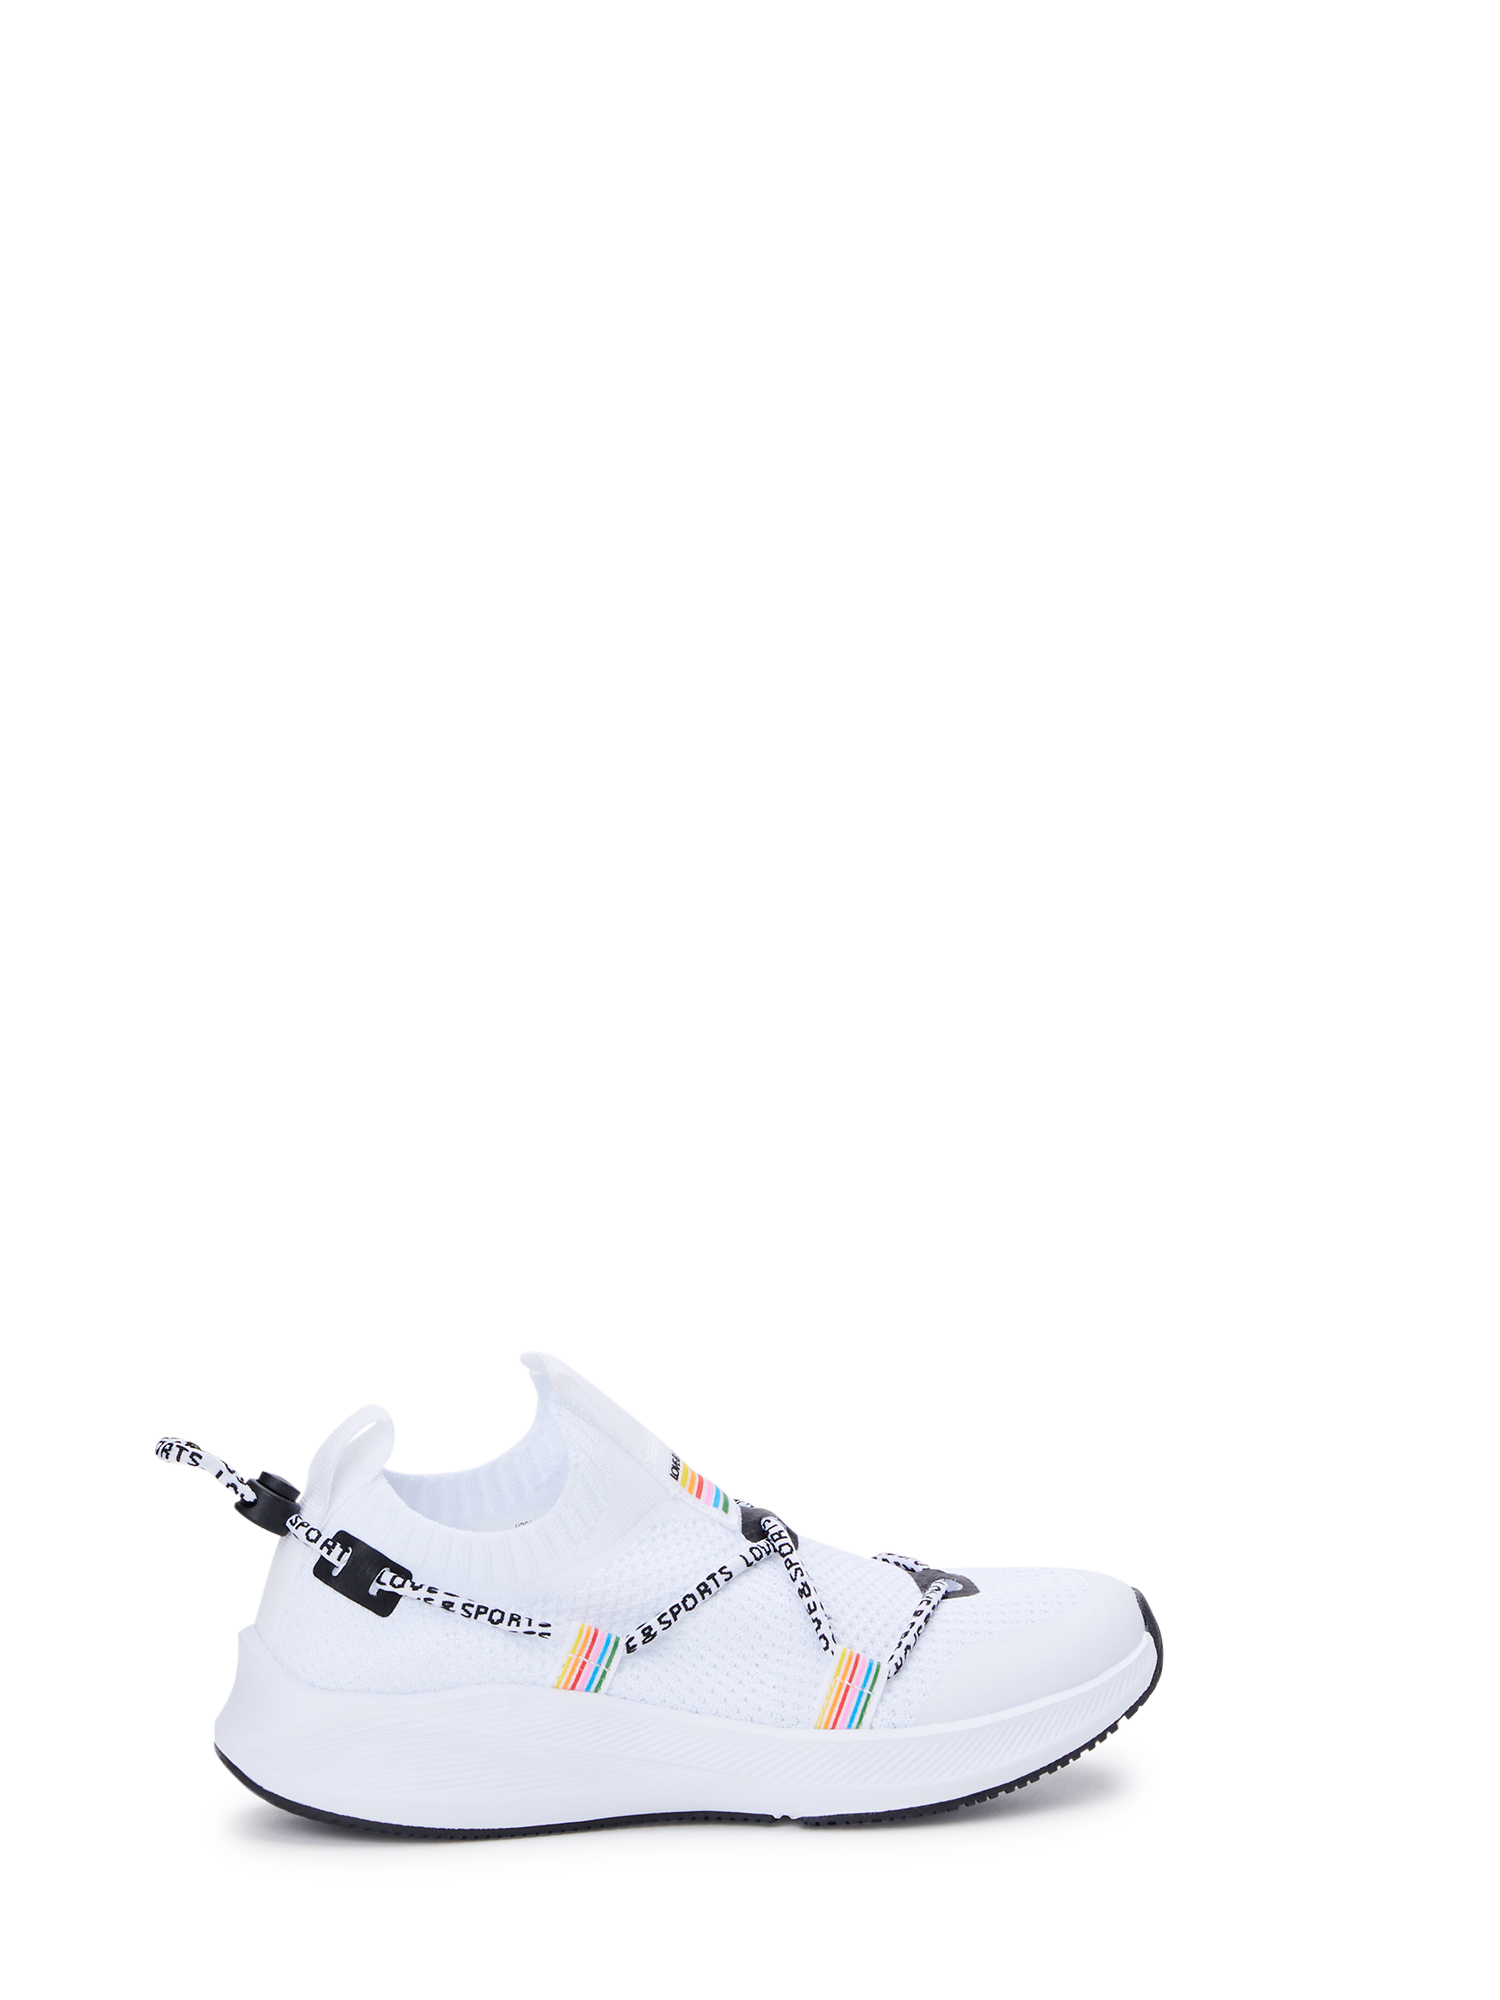 Love & Sports Women's Athleisure Slip-On Toggle Sneakers 